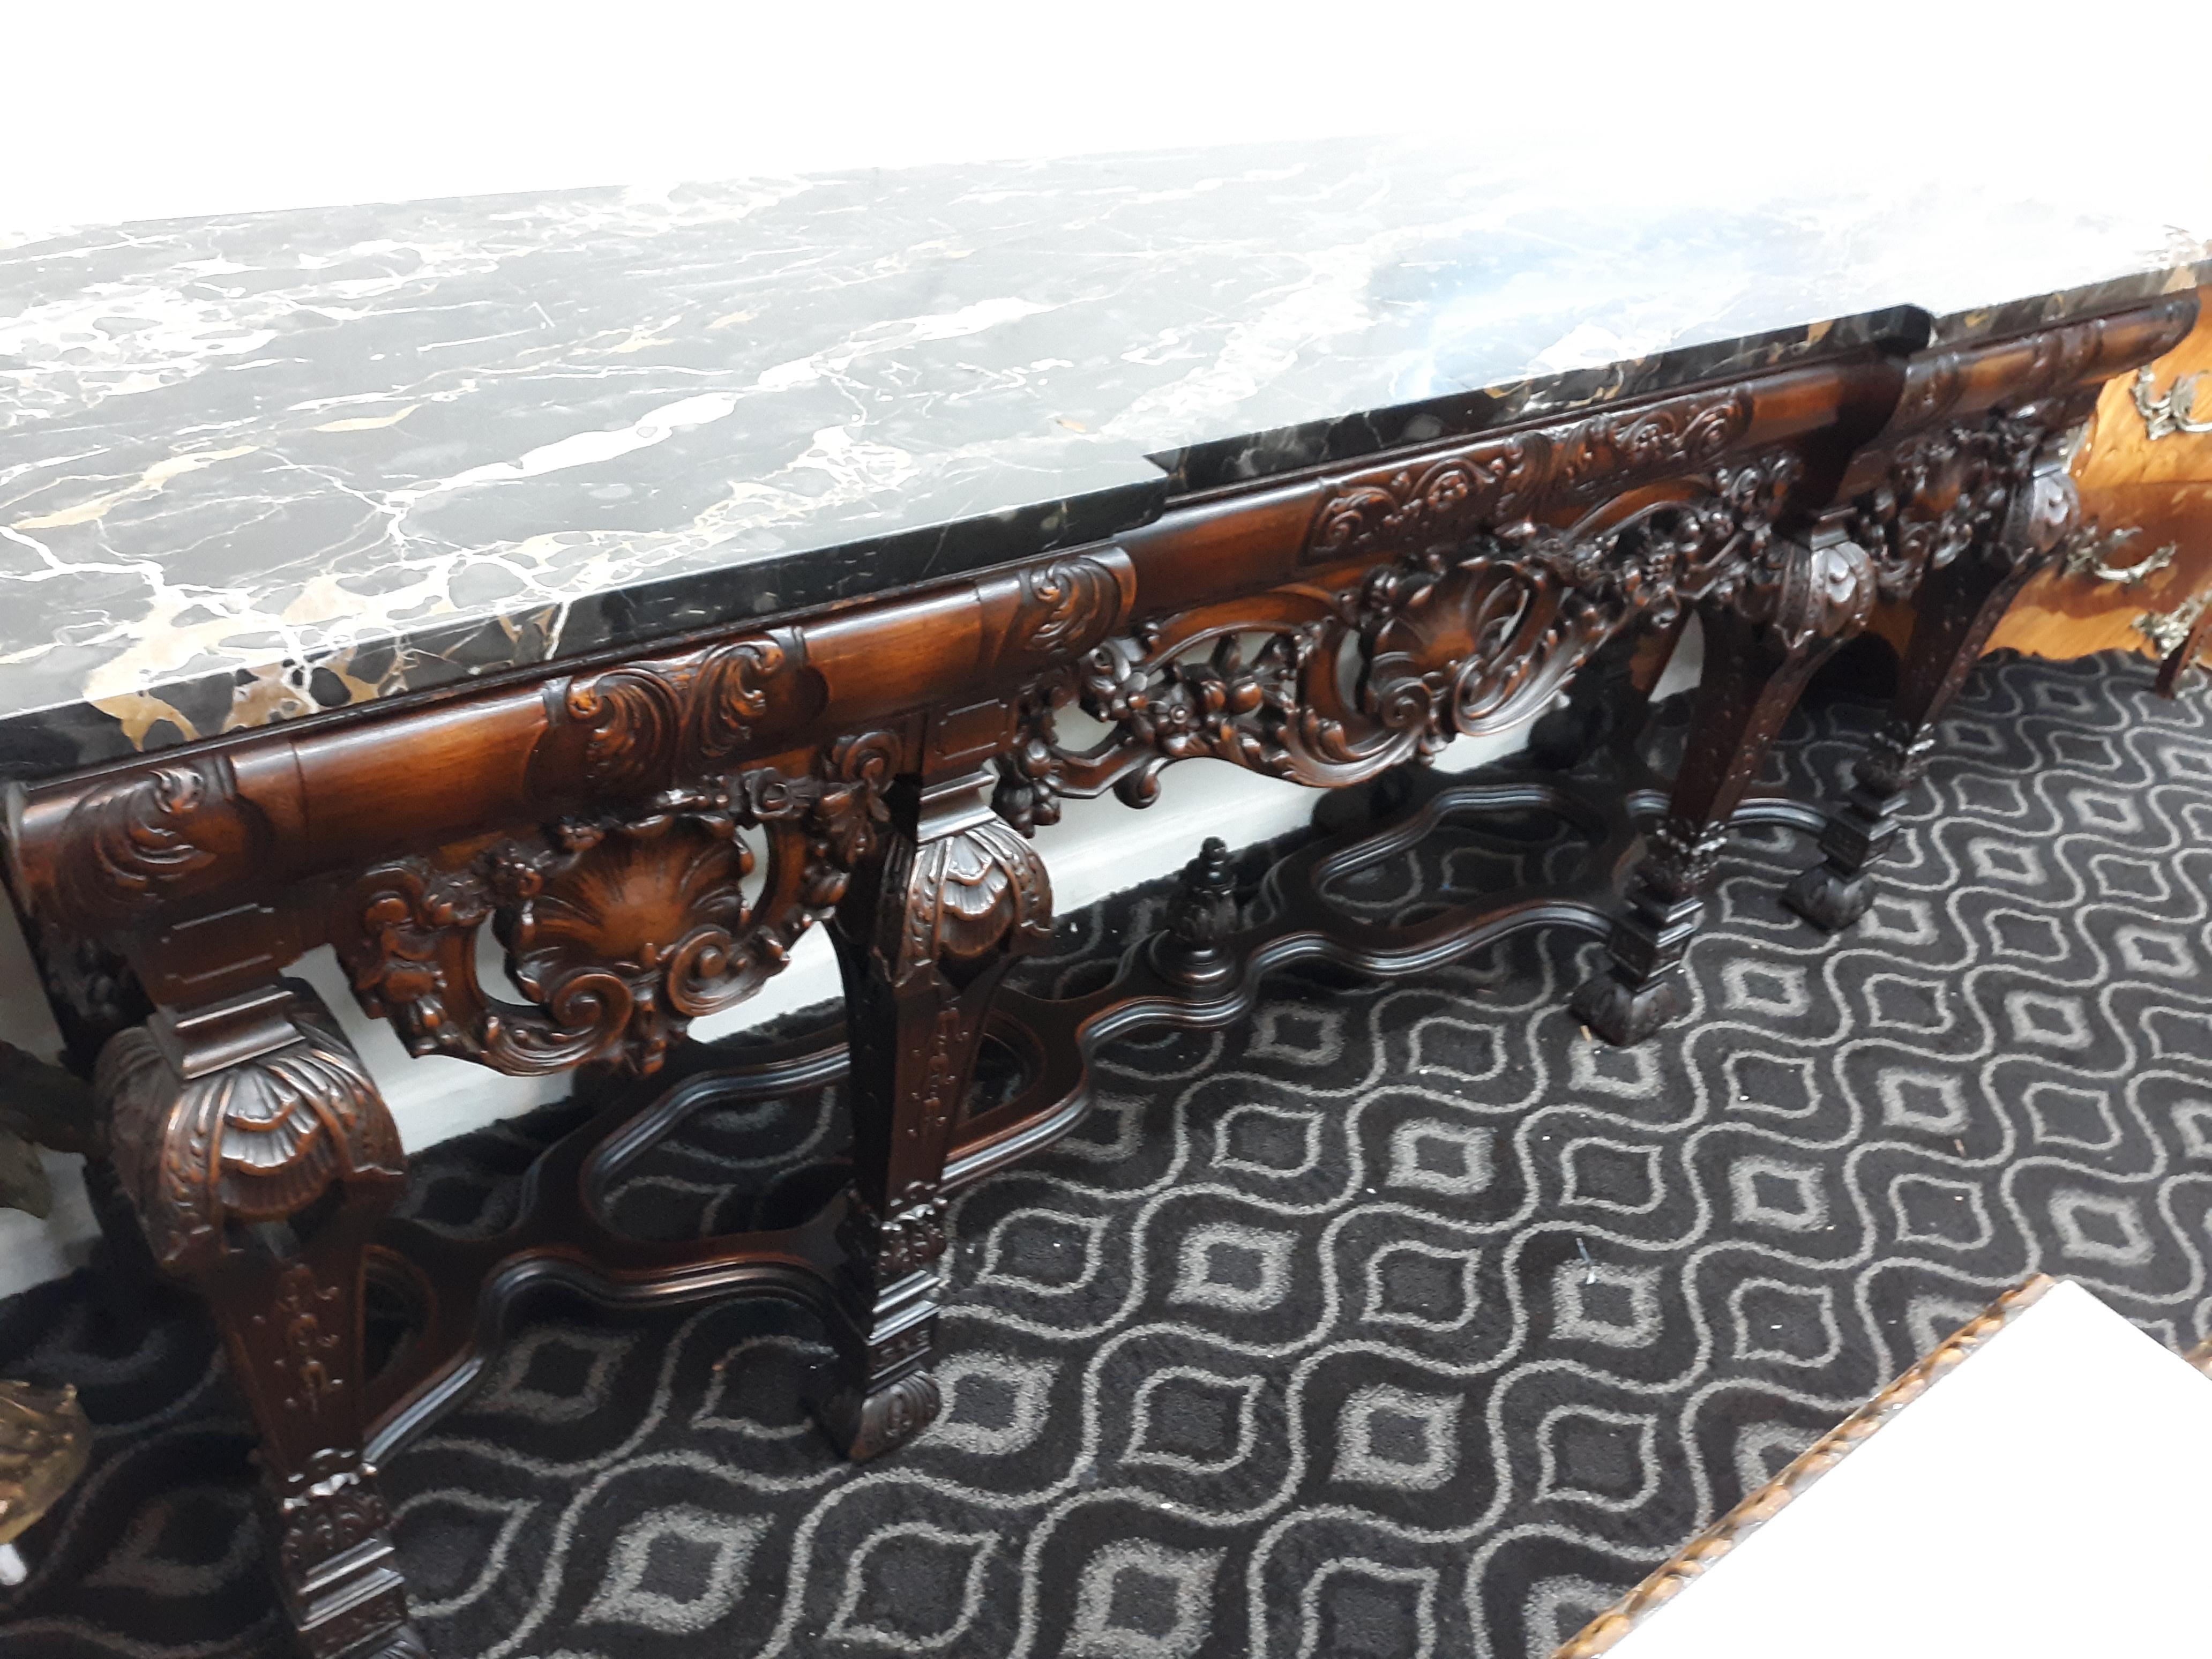 Ornate Mahogany entrance table circa 1920 with black marble top. This rare piece makes the house. Period. A gorgeous crafted piece of work, solid and heavy, of which the seller only knows of 3 in existence (One of the other 2 is privately owned, and